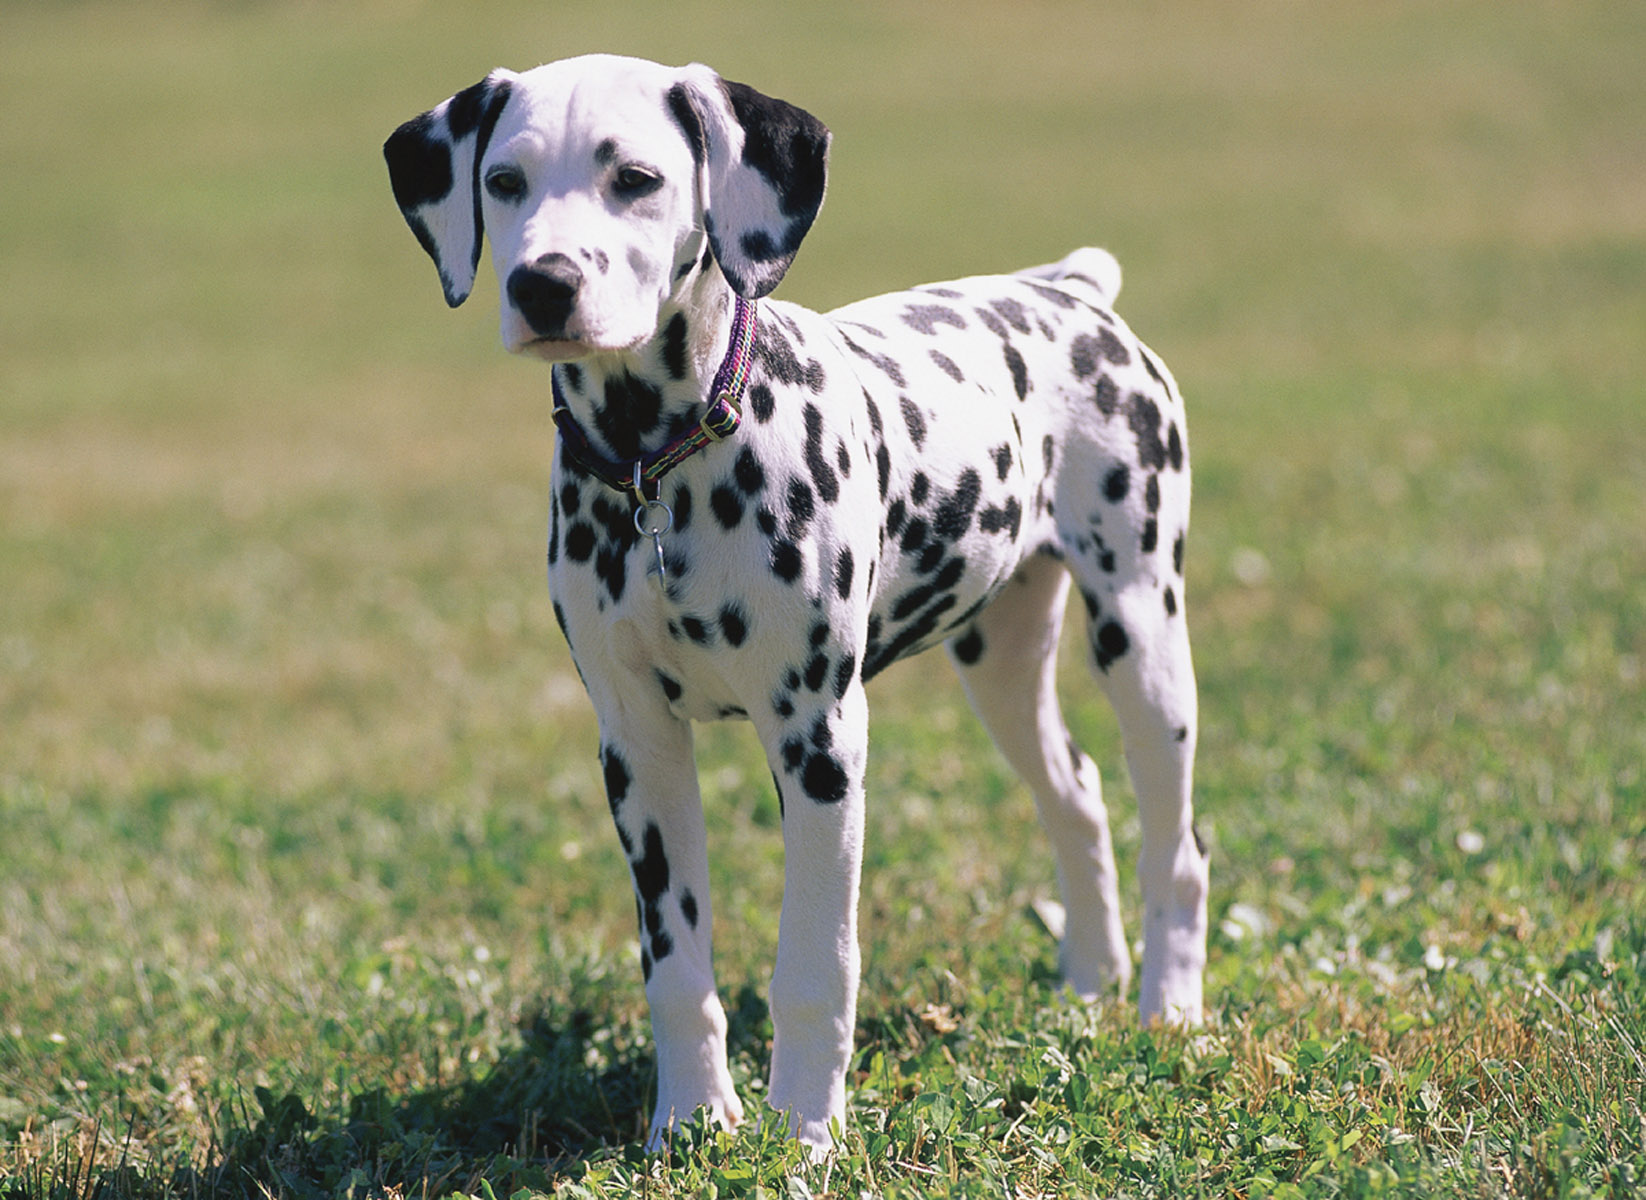 What to feed your dog *Dalmatian* : Natural Pet LLC